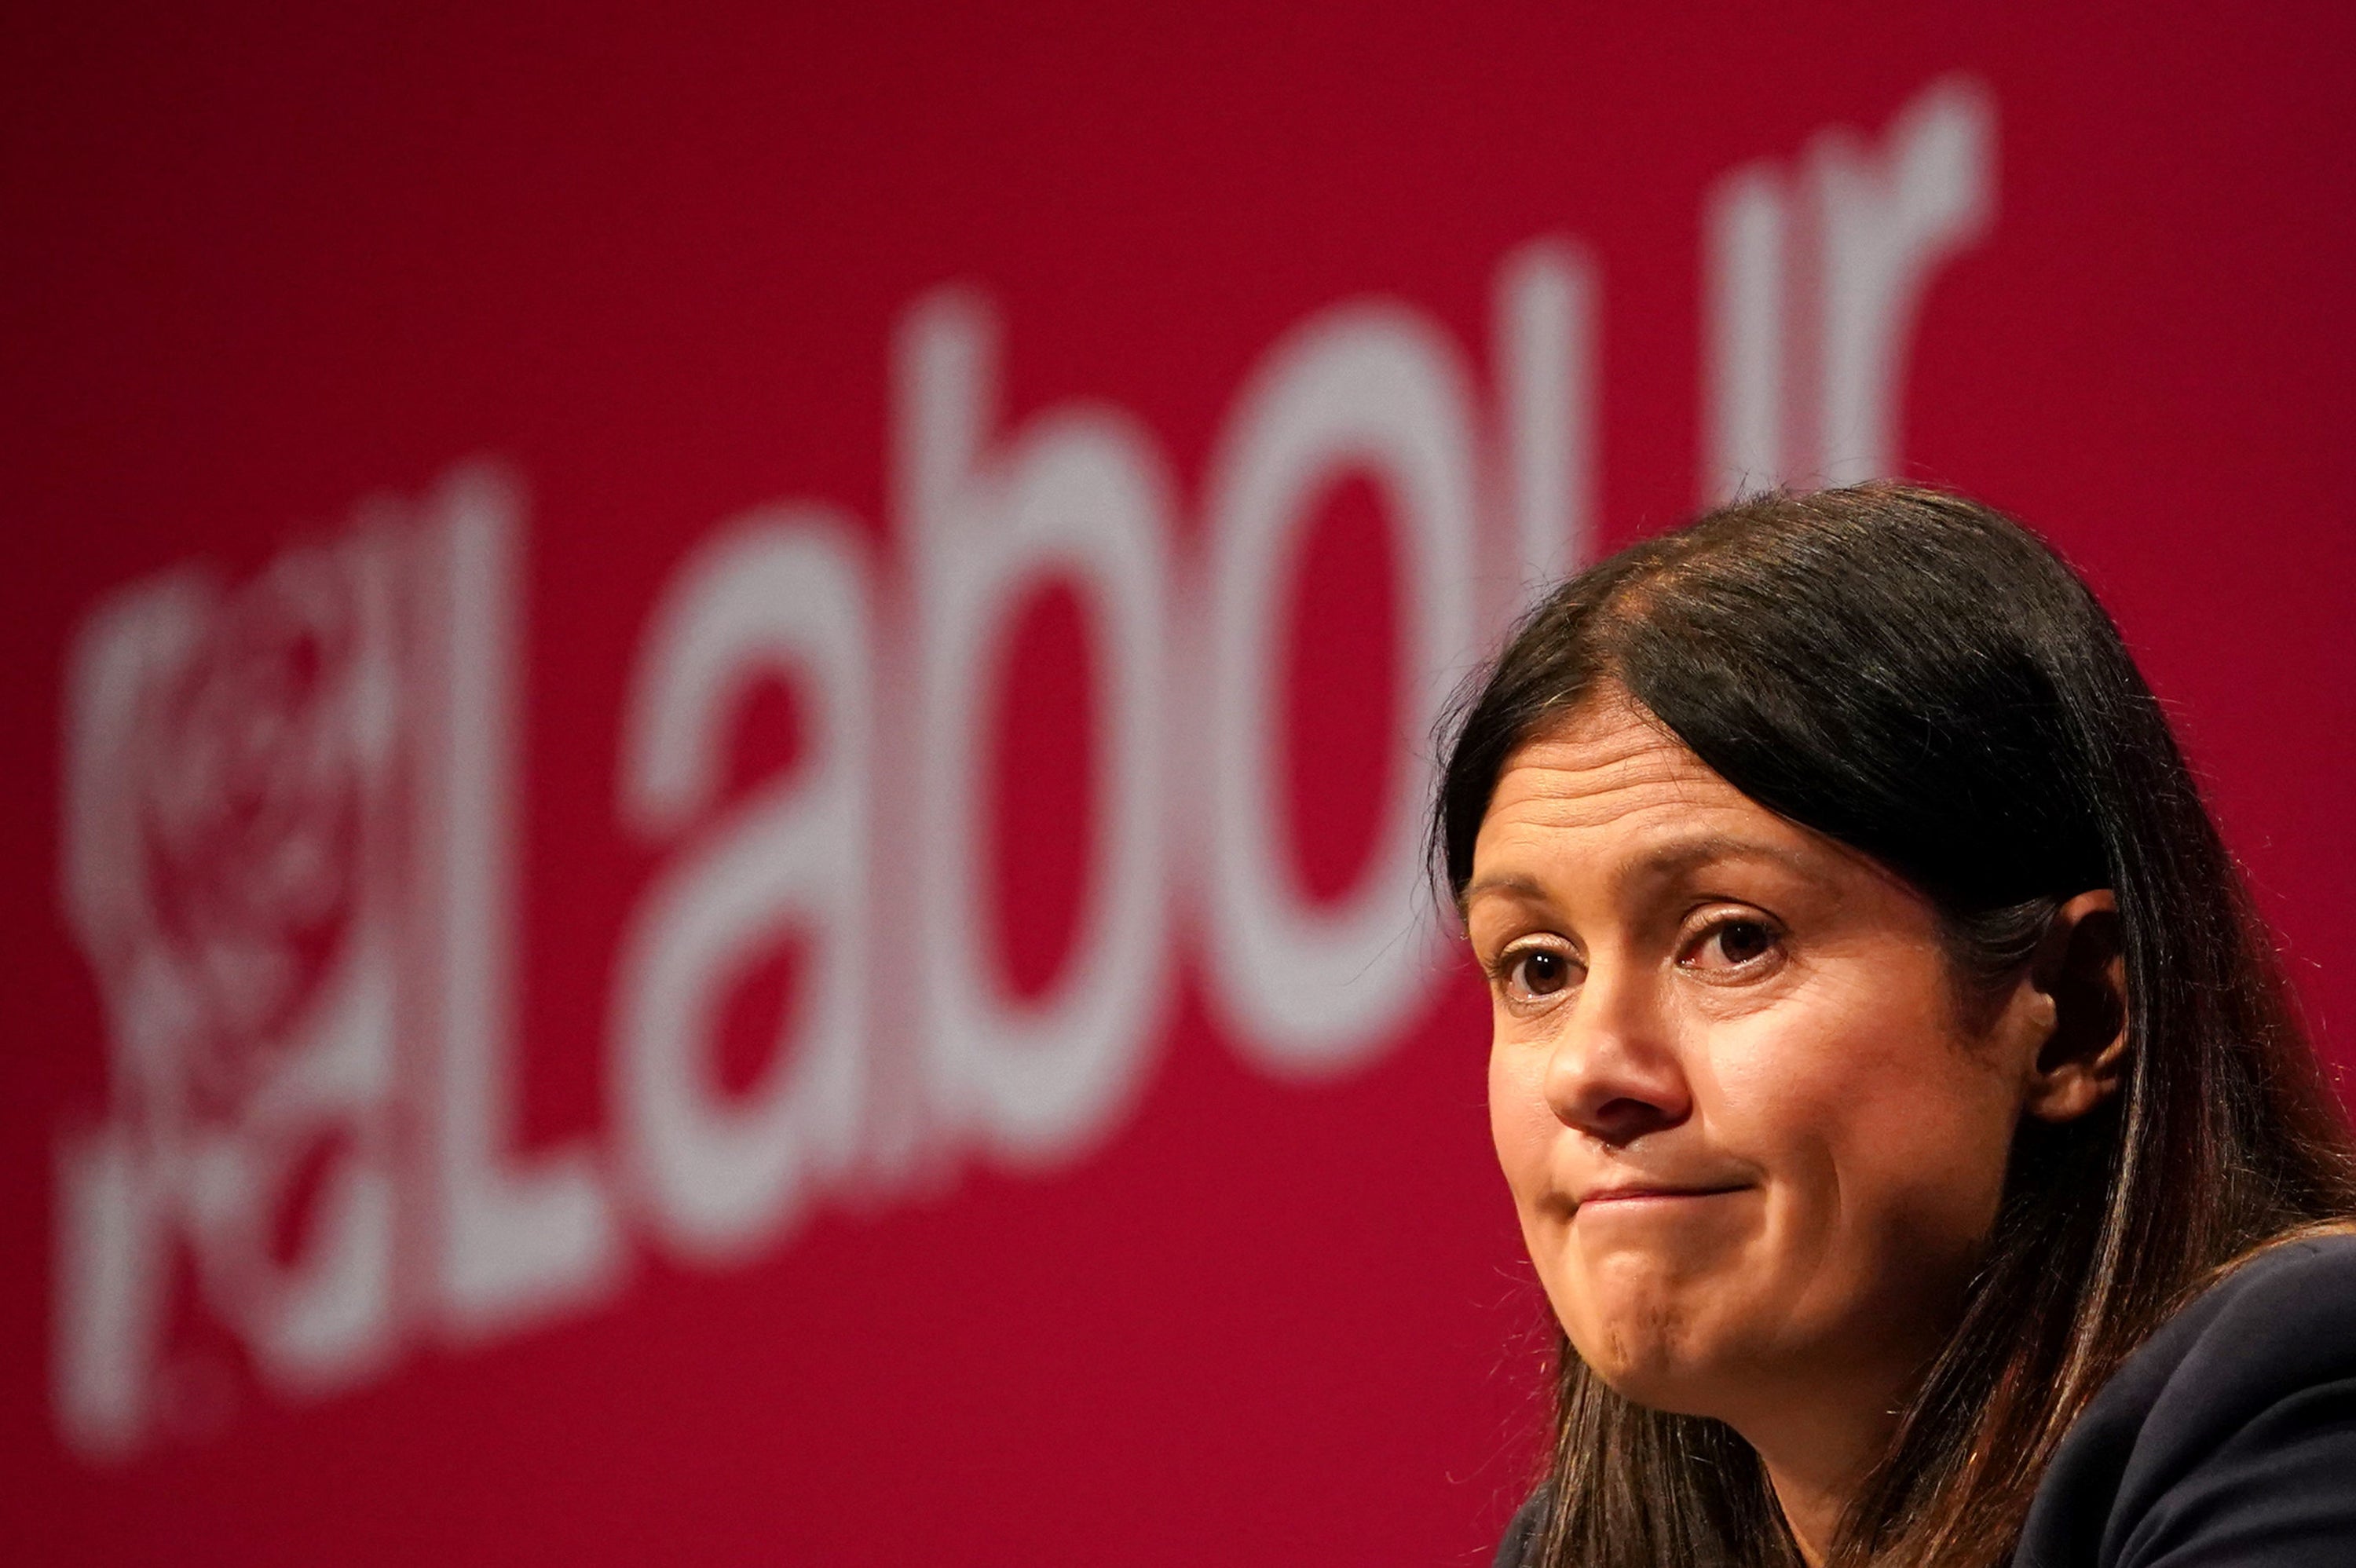 Lisa Nandy said she will make it her ‘mission to bring Labour home to people and to deliver on promises that the Government simply isn’t capable of doing’ (Gareth Fuller/PA)